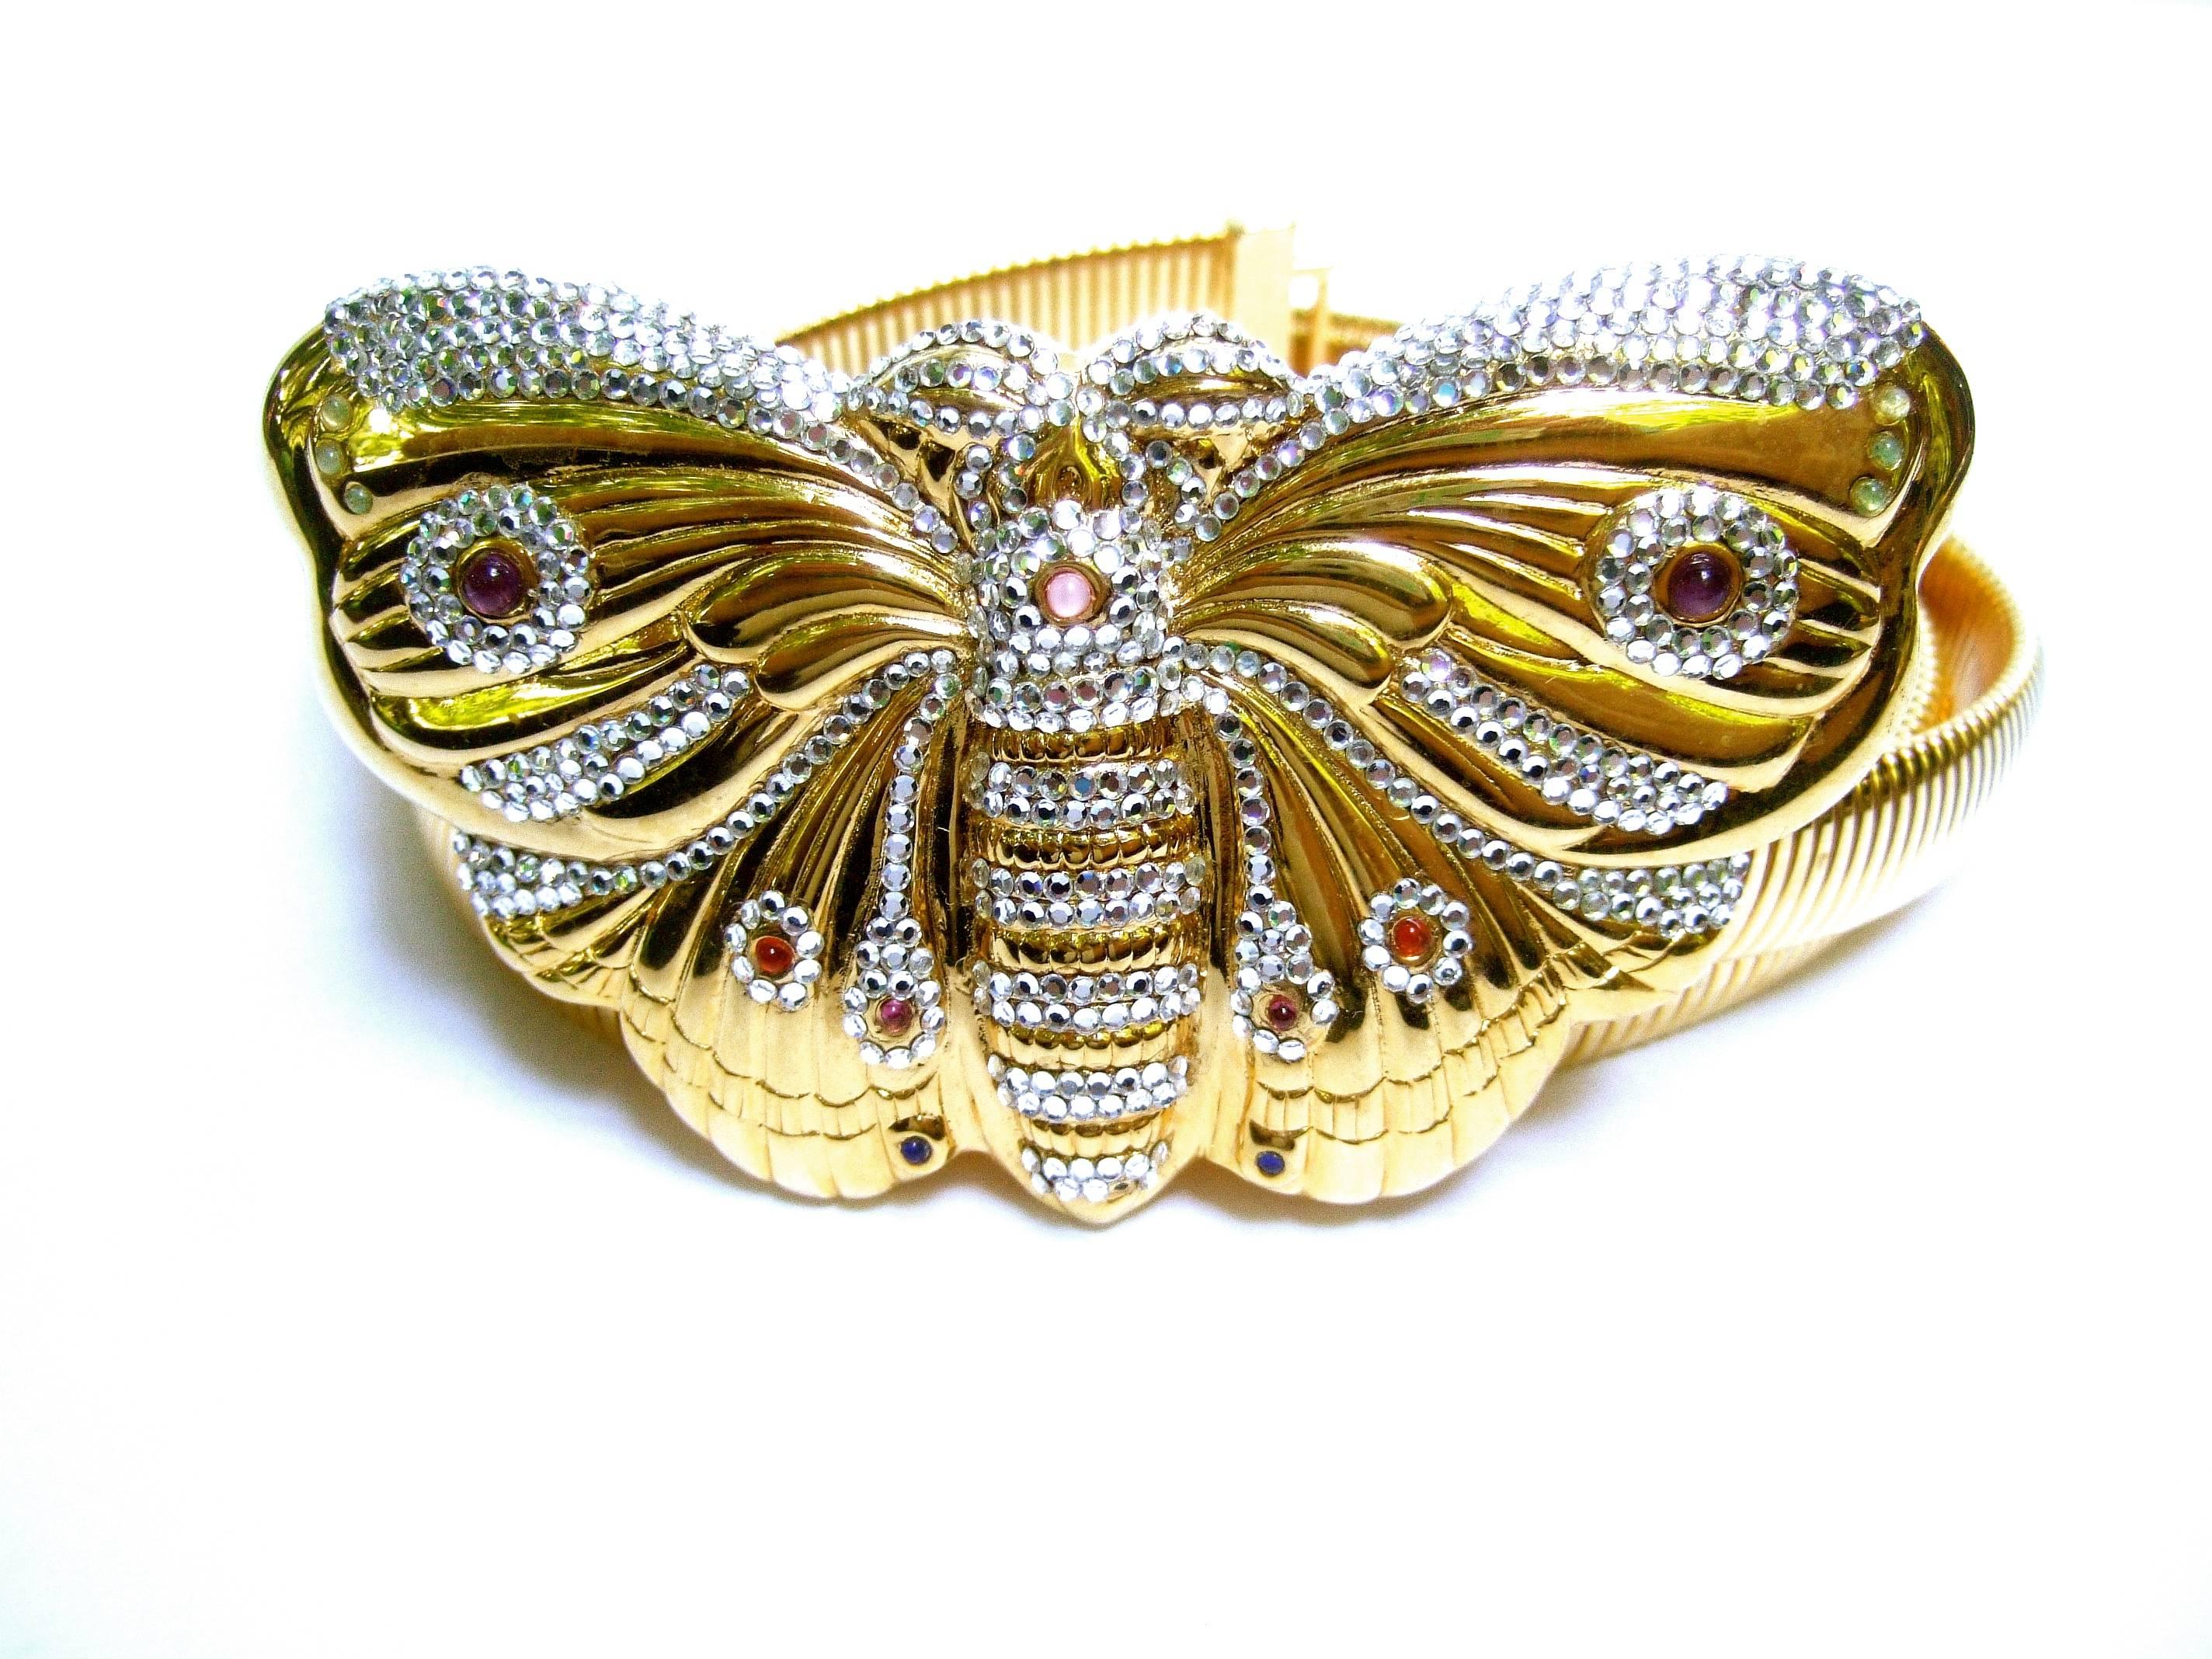 Judith Leiber Exquisite Massive Jeweled Butterfly Belt circa 1980s 2